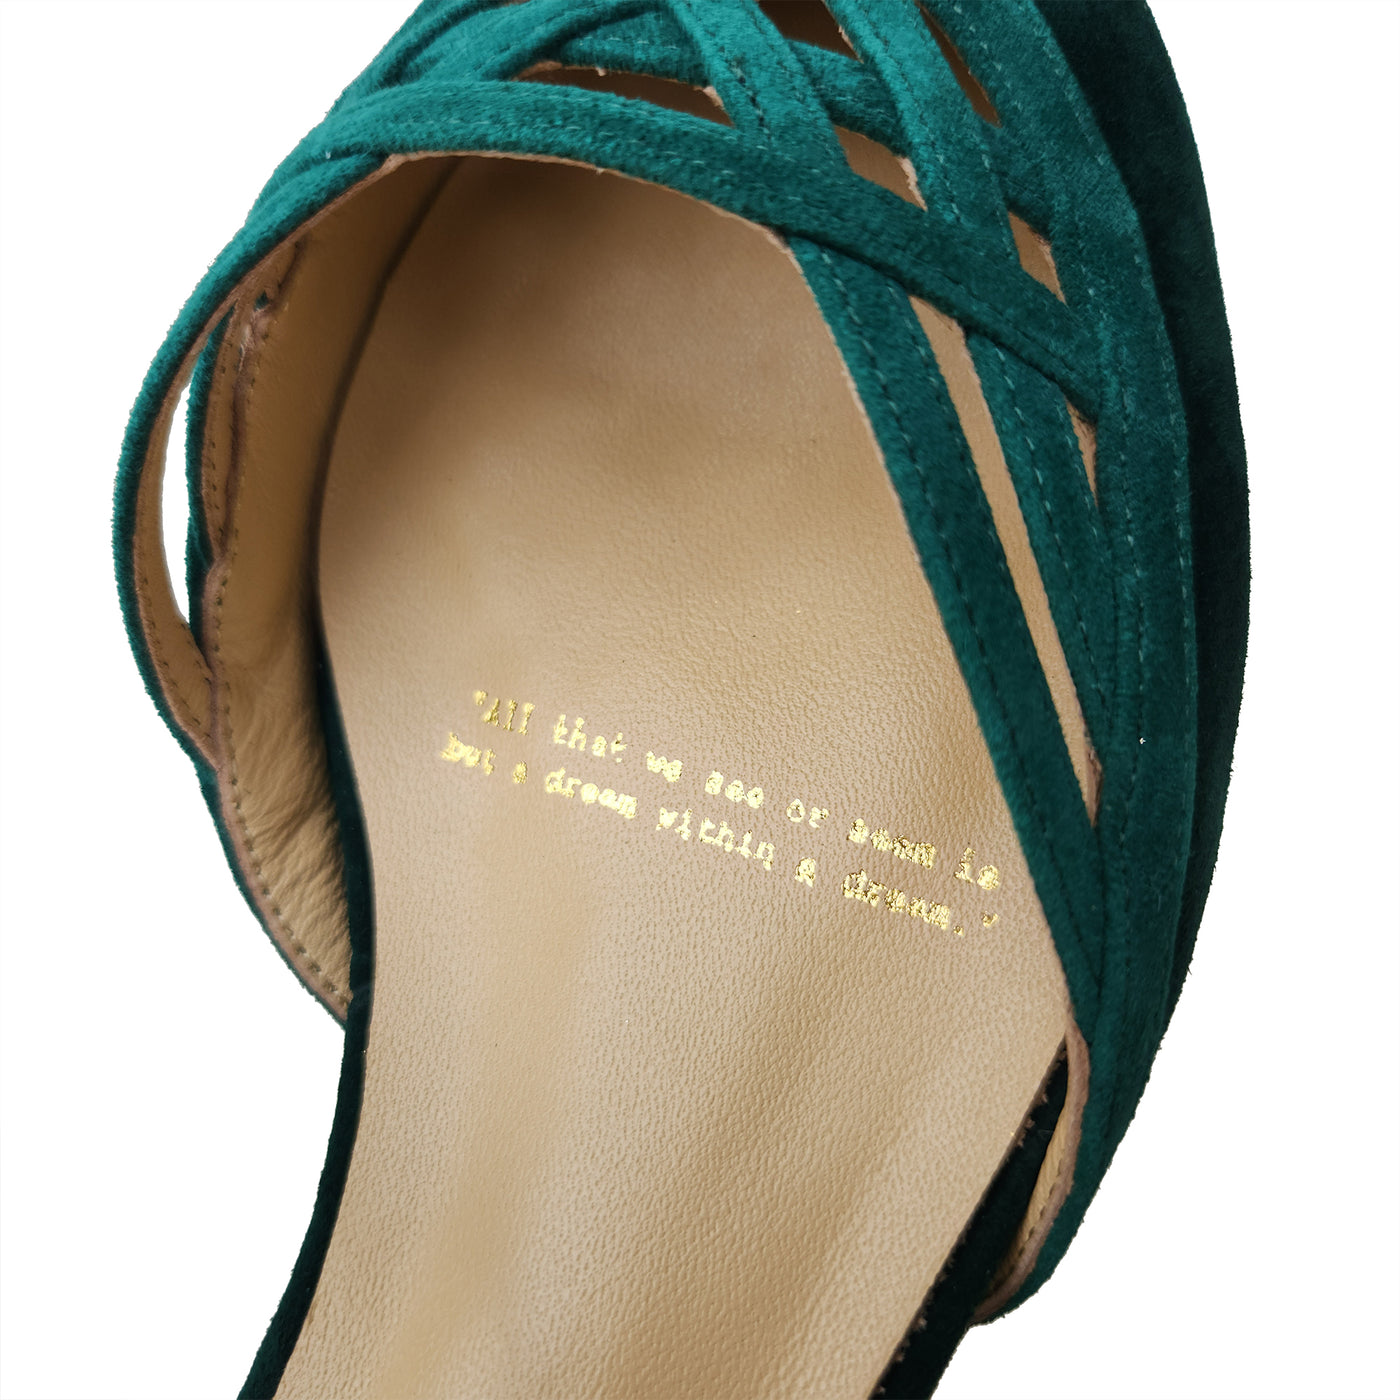 Charlie Stone Shoes vintage inspired 1920-50's dark academia aesthetic women's flats Serpente emerald with hidden wedge suede leather